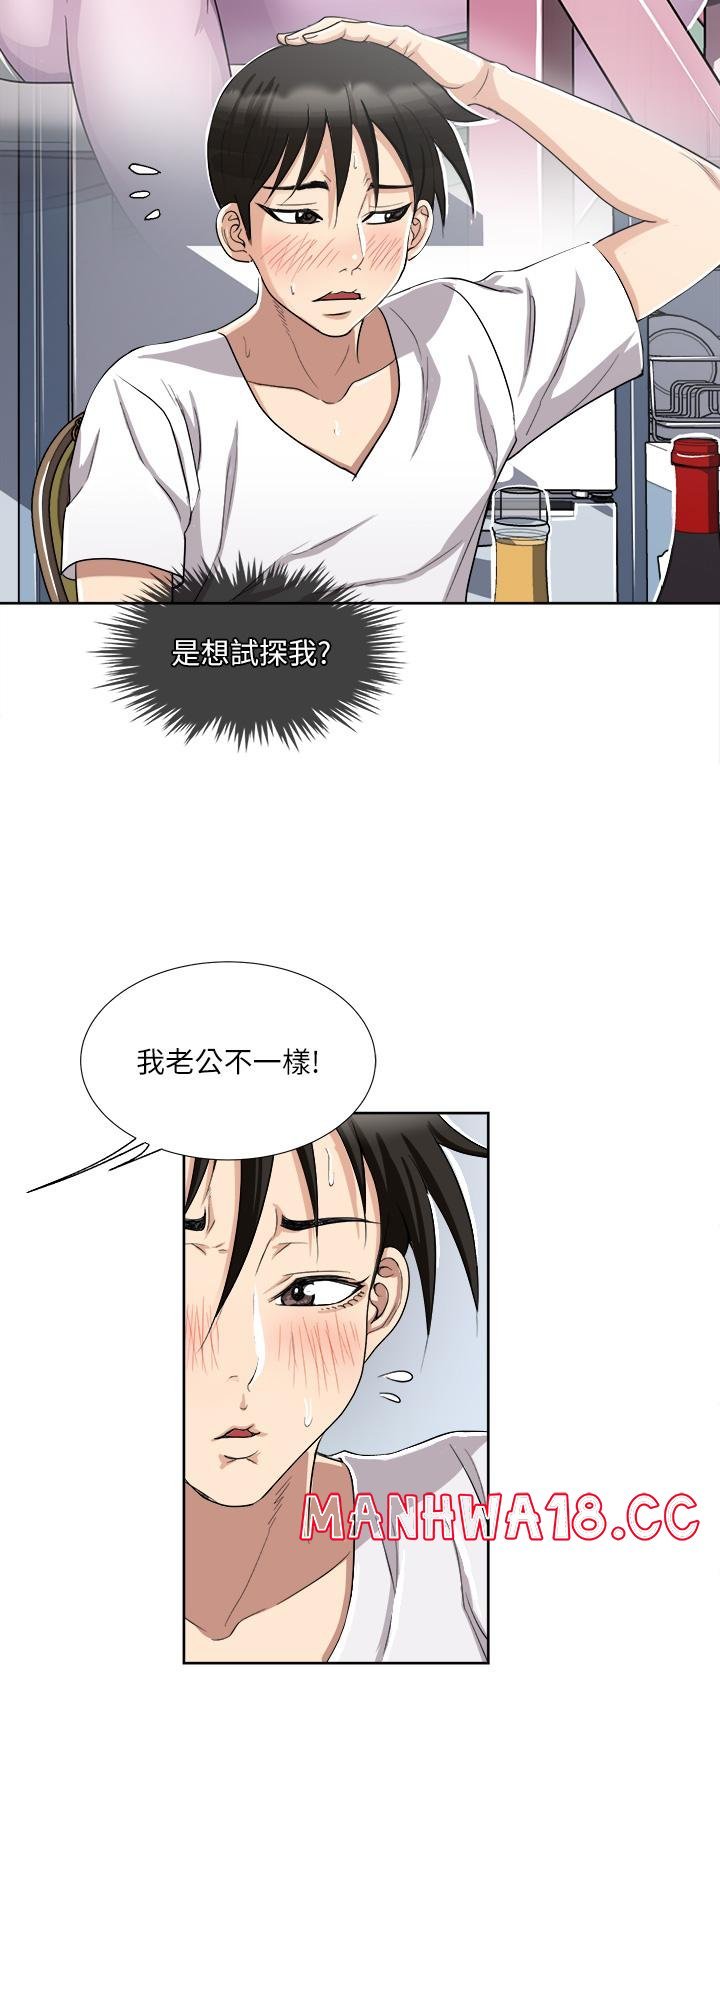 just-once-raw-chap-3-20